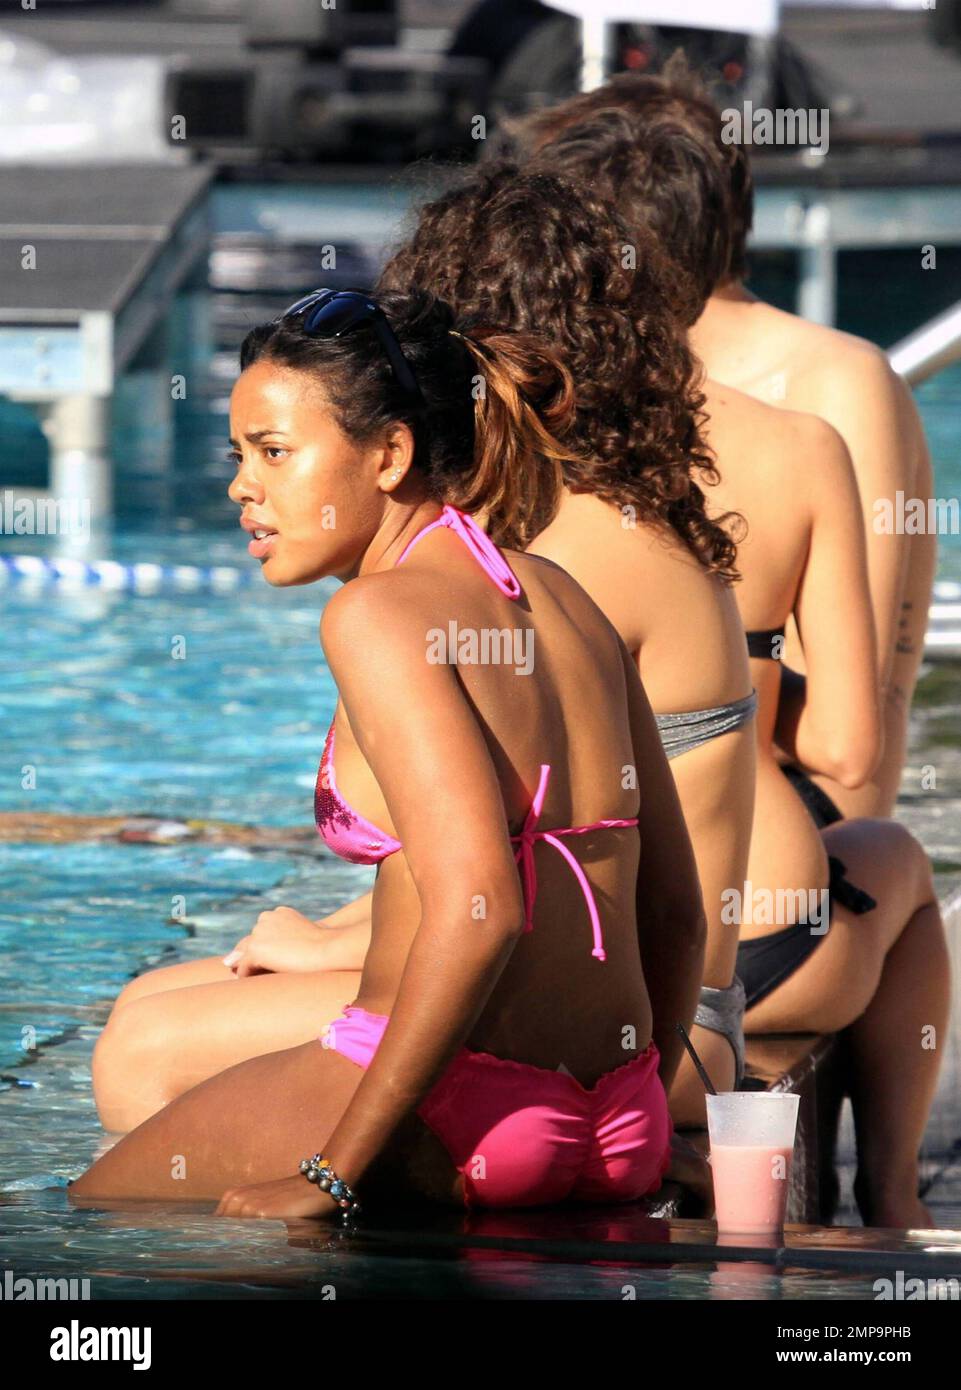 Daughter of RUN DMCs Rev Run, Angela Simmons wears a pink bikini while enjoying the South Florida sun poolside and on the beach on New Years